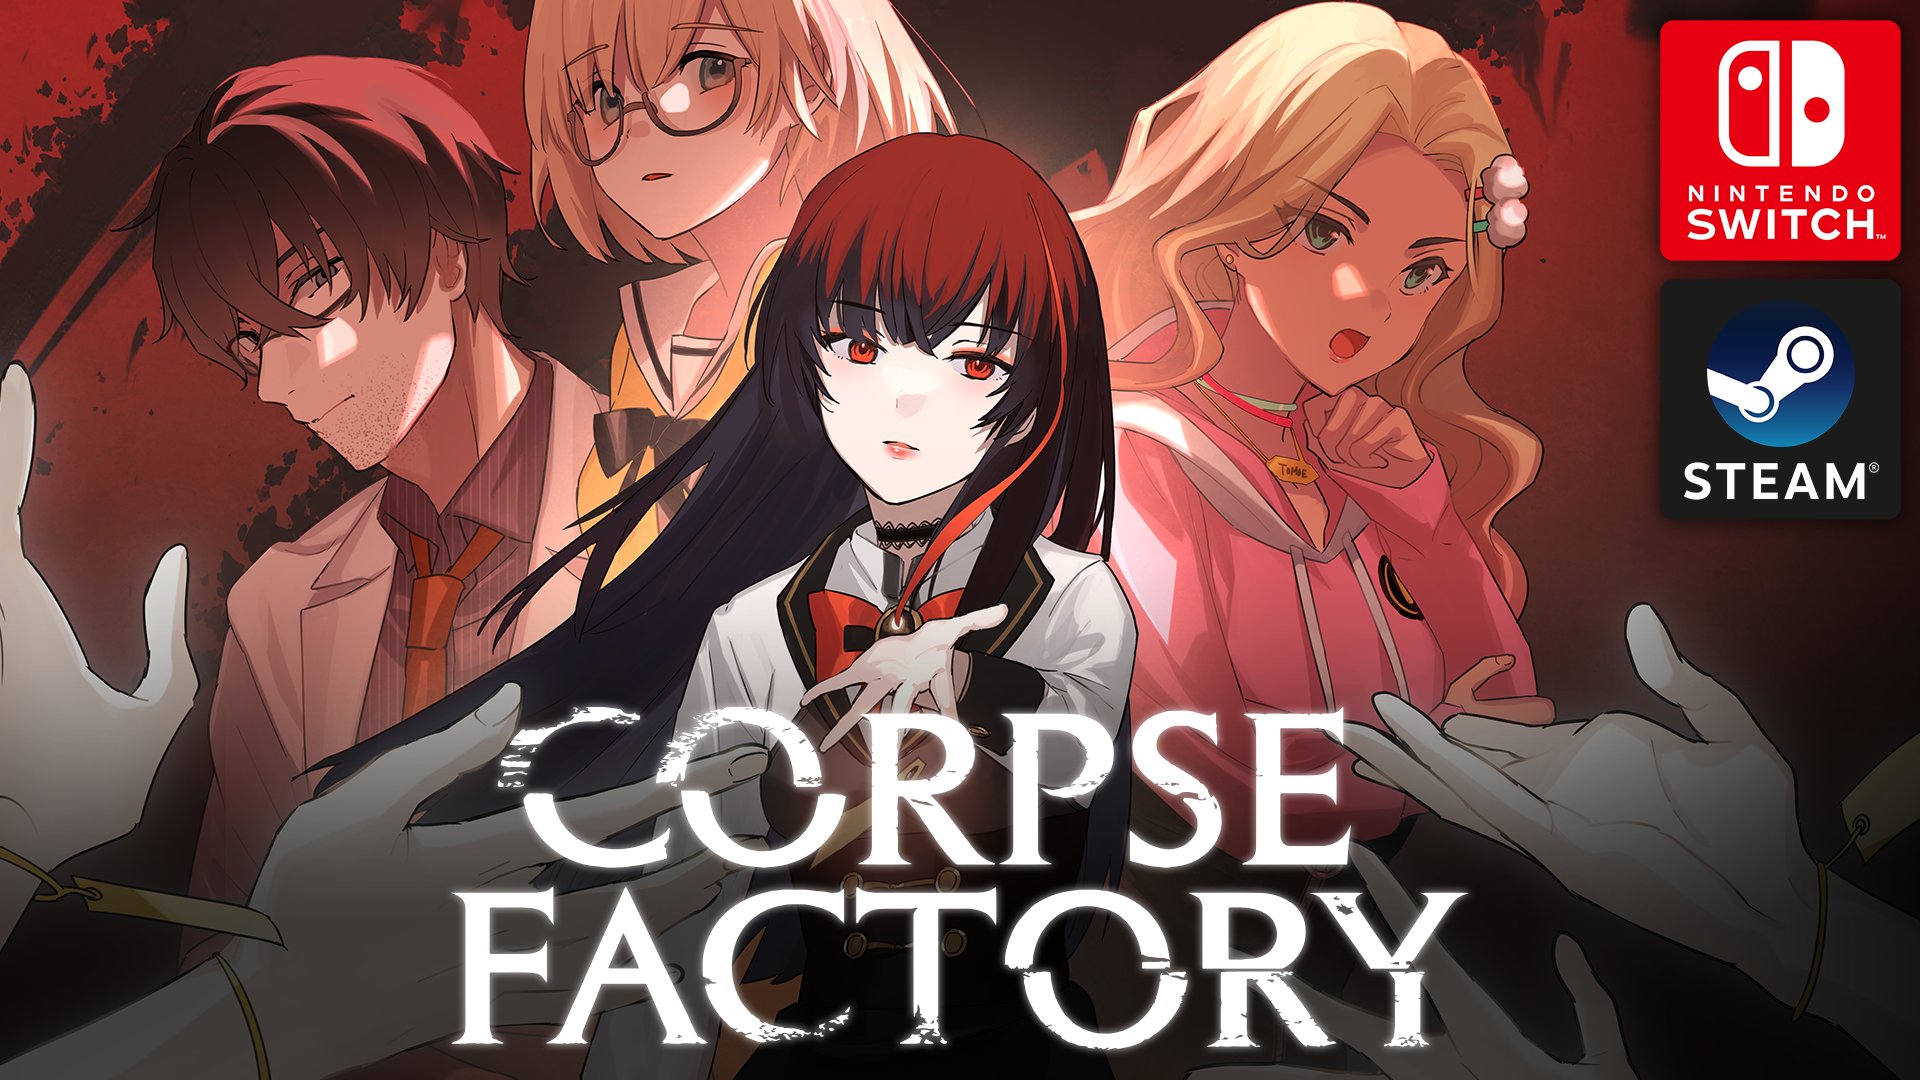 Psychological thriller visual novel Corpse Factory coming to Switch